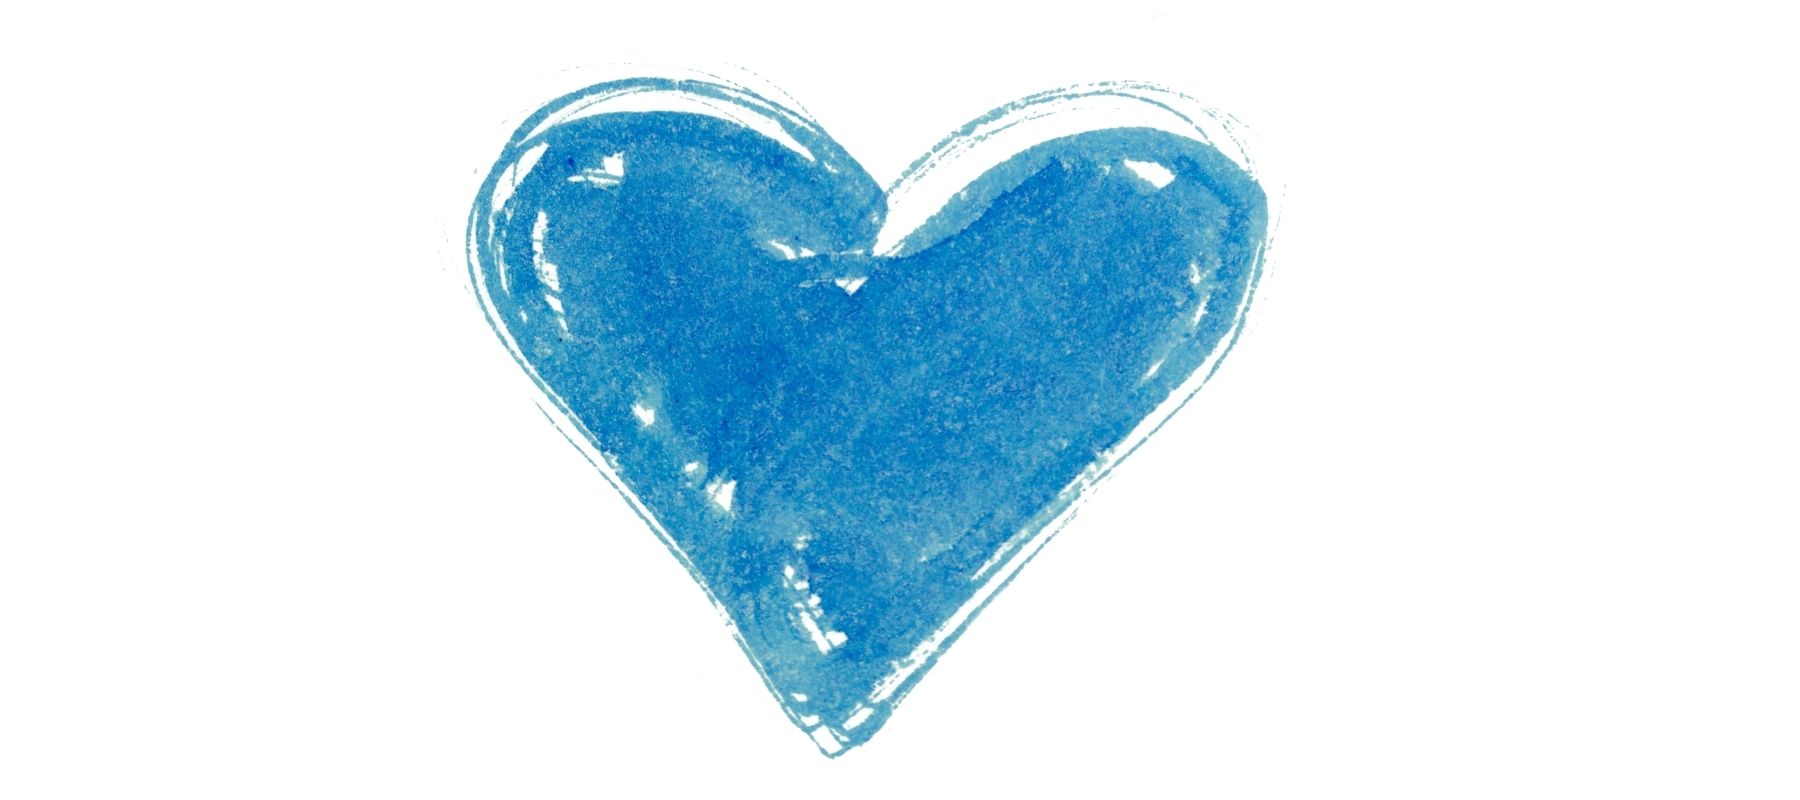 Drawn blue heart for Valentine's Day